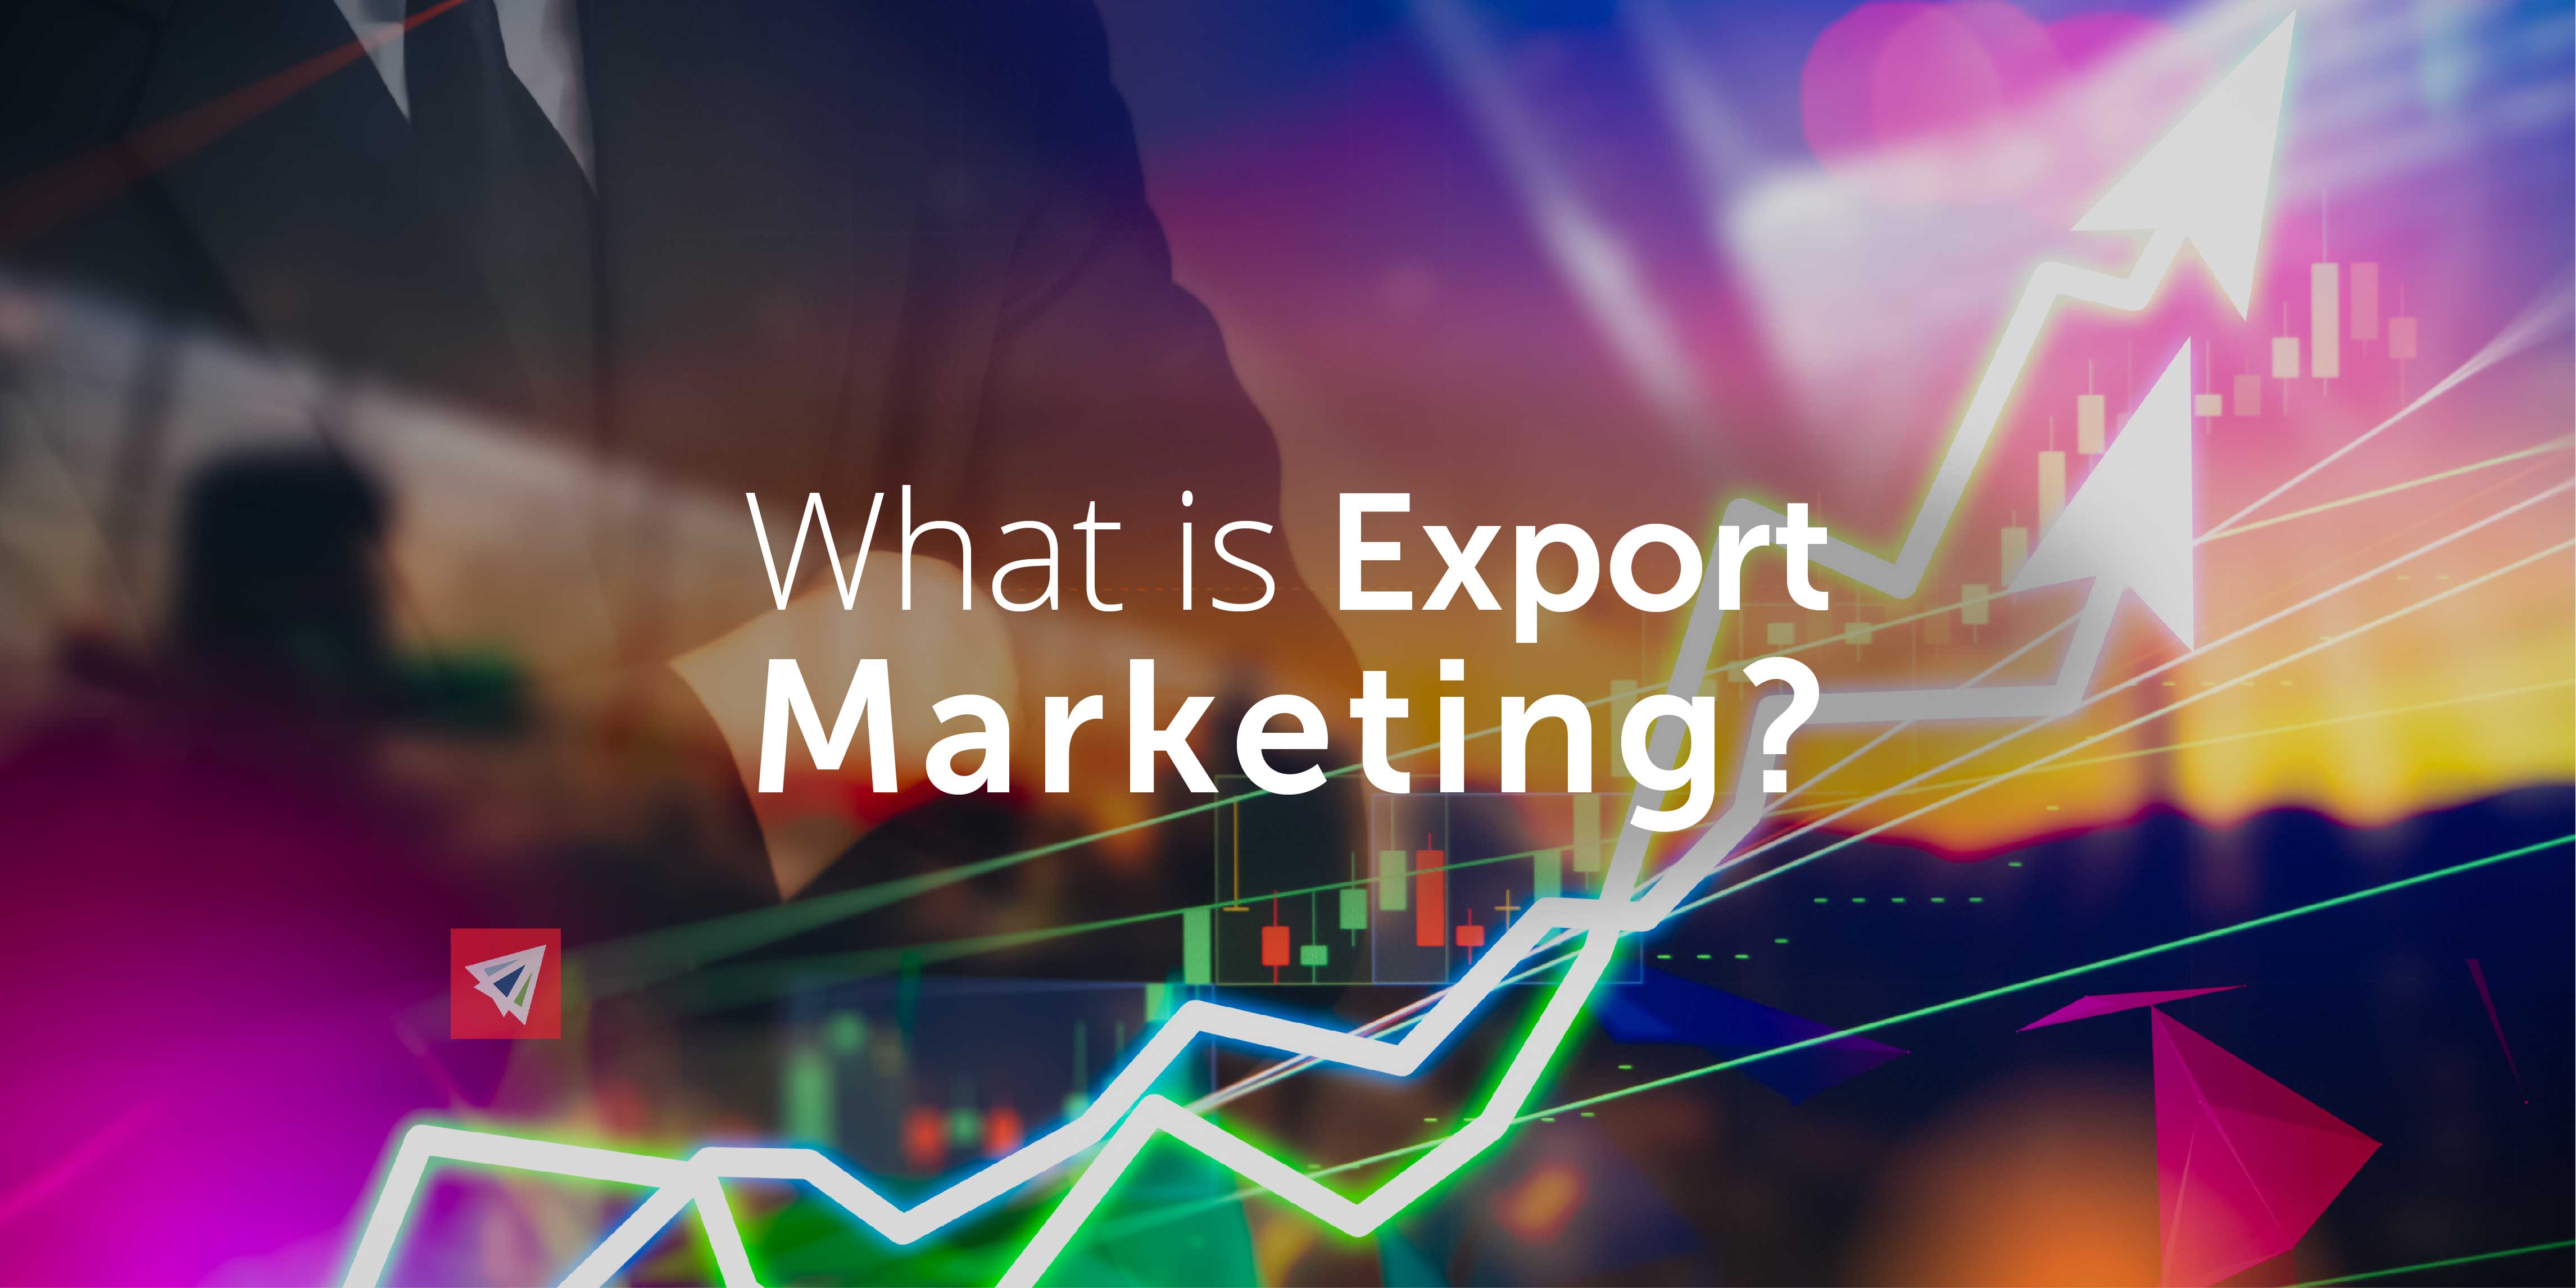 What is Export Marketing